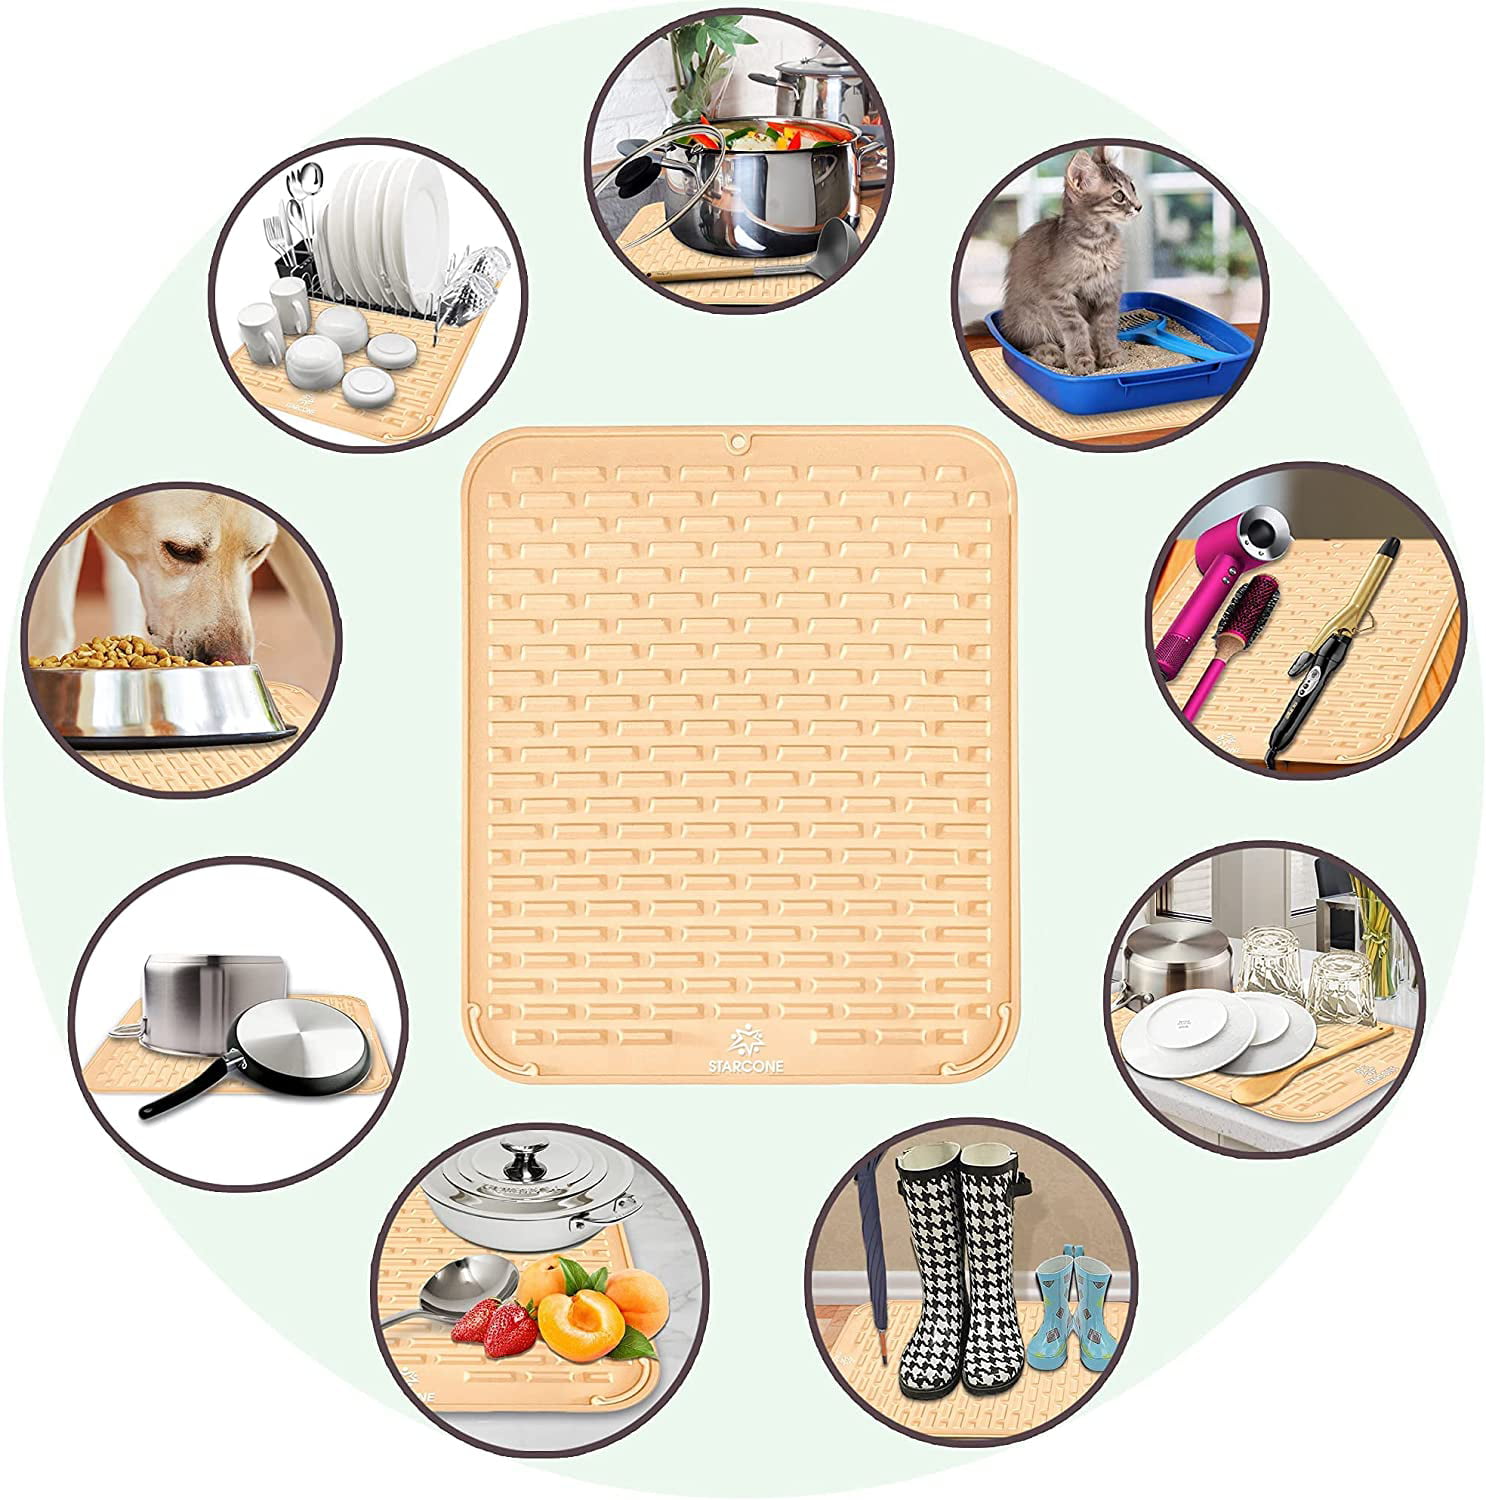 Bundle Pack of 2 with 18x16 8mm High Ridges Extra Large Creamy Beige Mat and Sponge or Soap Organizer Tray for Bathroom Kitchen Countertop STARCONE Silicone Dish Drying Mat